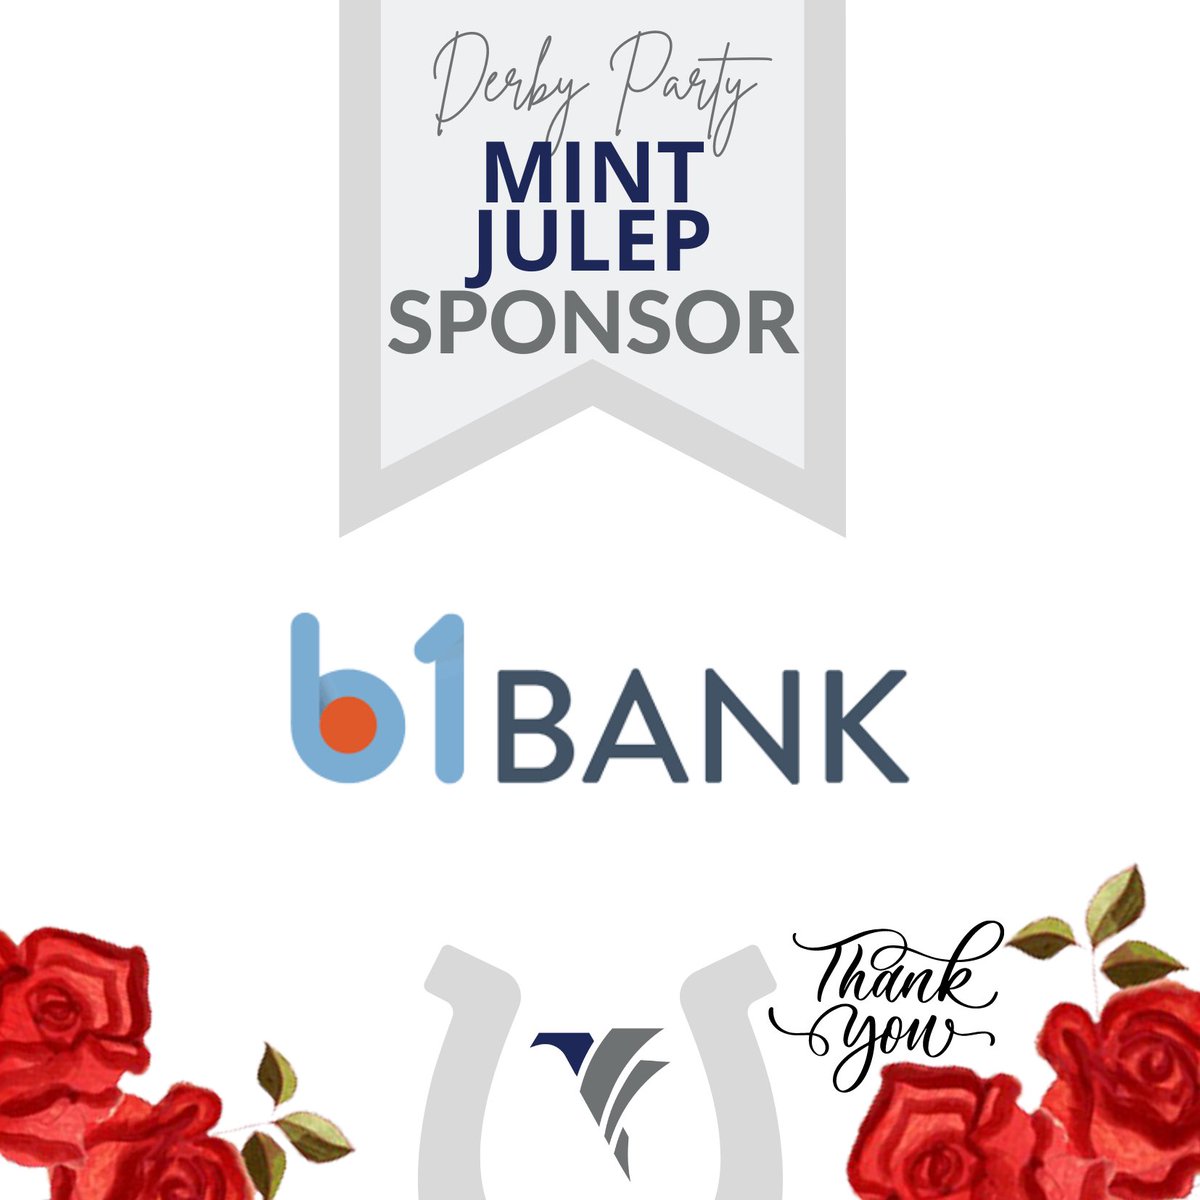 Thank you to b1 Bank for being a Mint Julep Sponsor for our Derby Party!